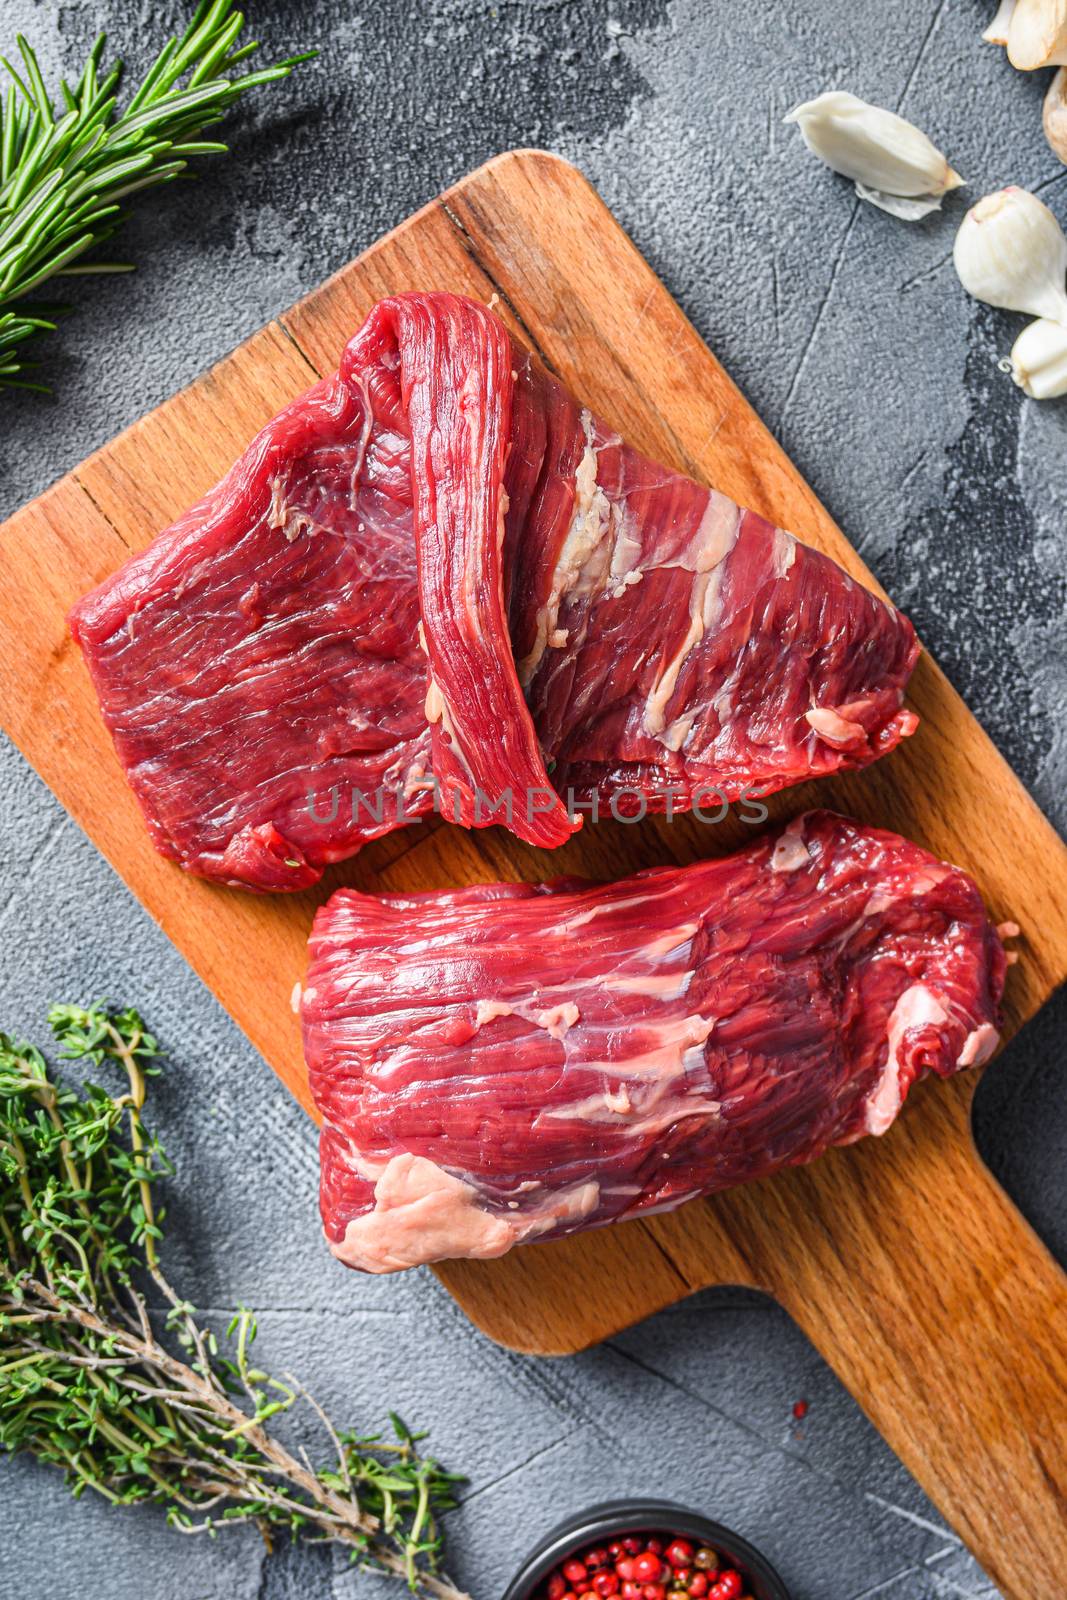 Raw flap steak flank cutHanger steak, bistro steak, fajita meat, on woods chopping board, with herbs tomatoes peppercorns over grey stone surface background top view close up by Ilianesolenyi